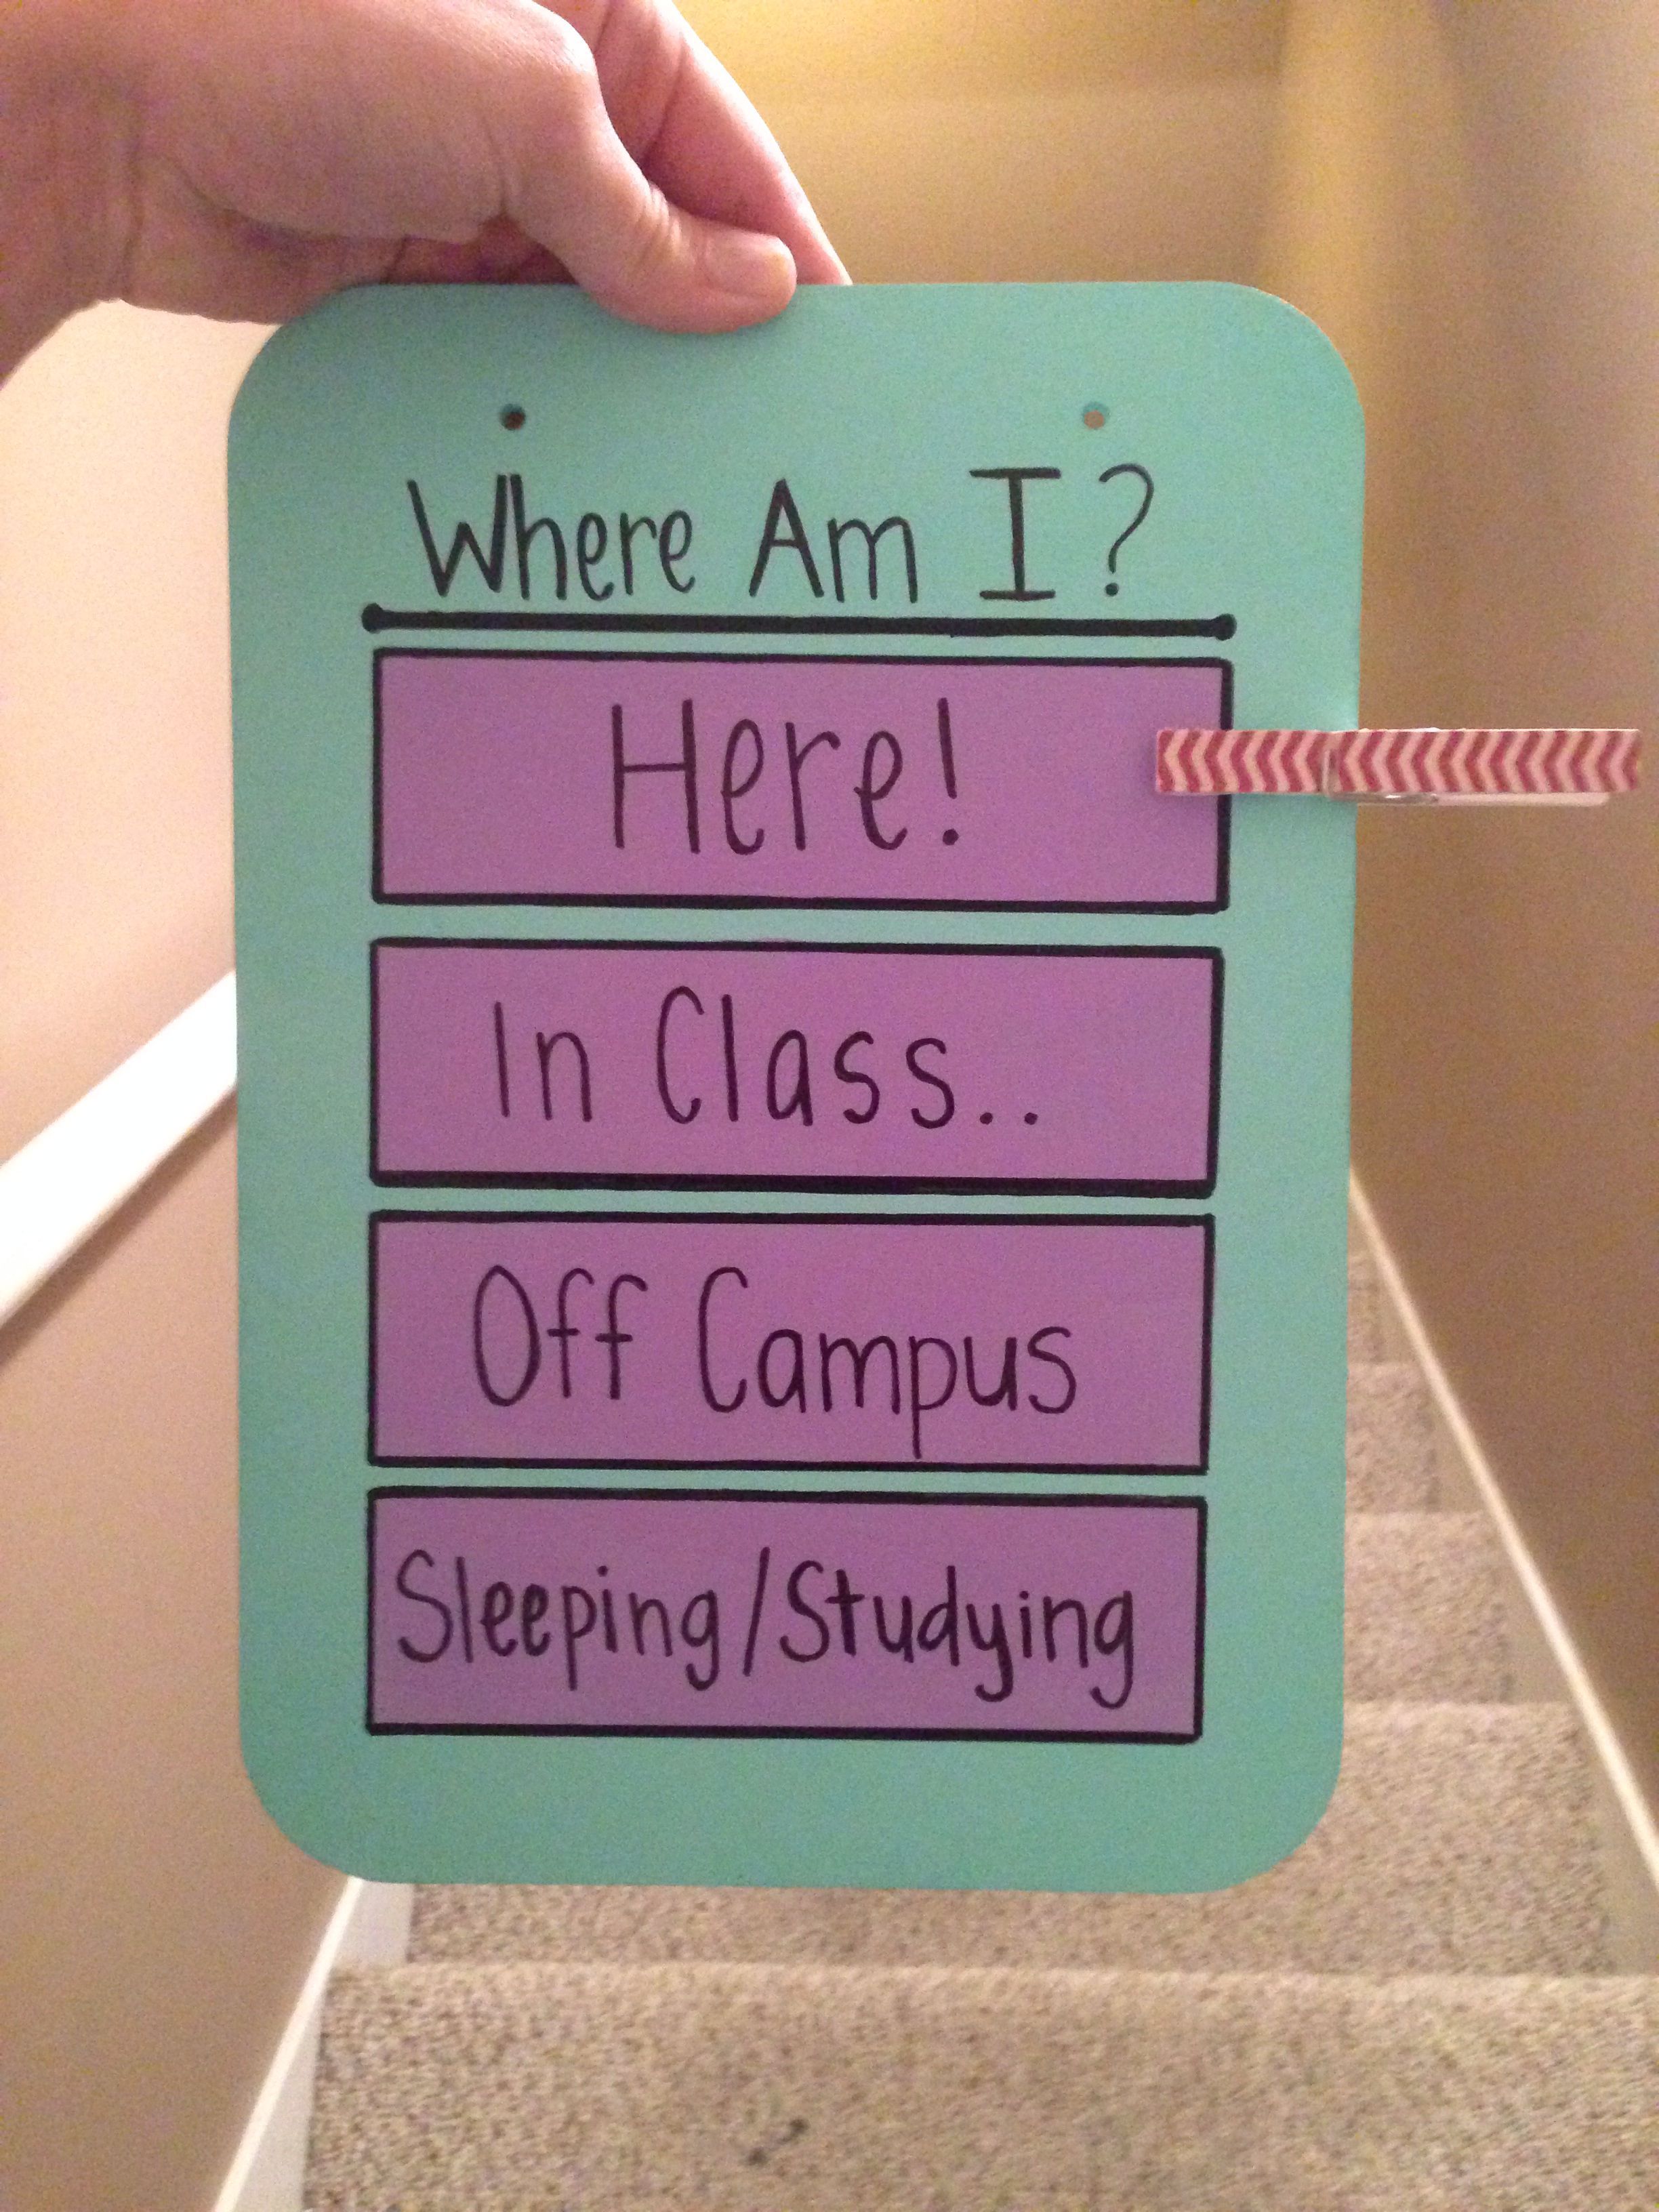 Something like that could be cute on the dorm room door, except maybe more like the harry potter thing